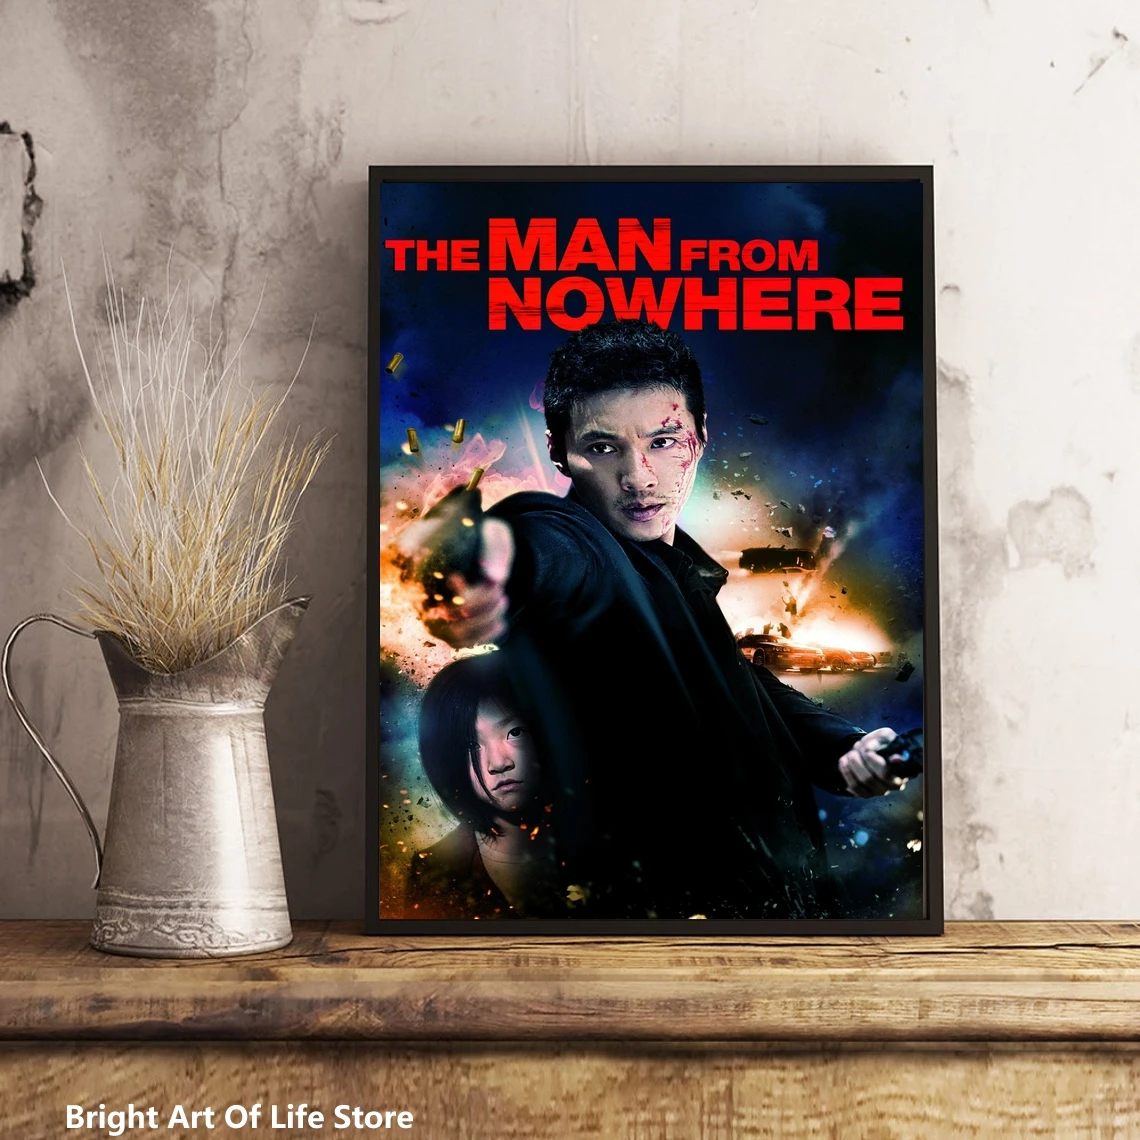 

The Man from Nowhere (2010) Movie Poster Star Actor Art Cover Canvas Print Decorative Painting (No Frame)